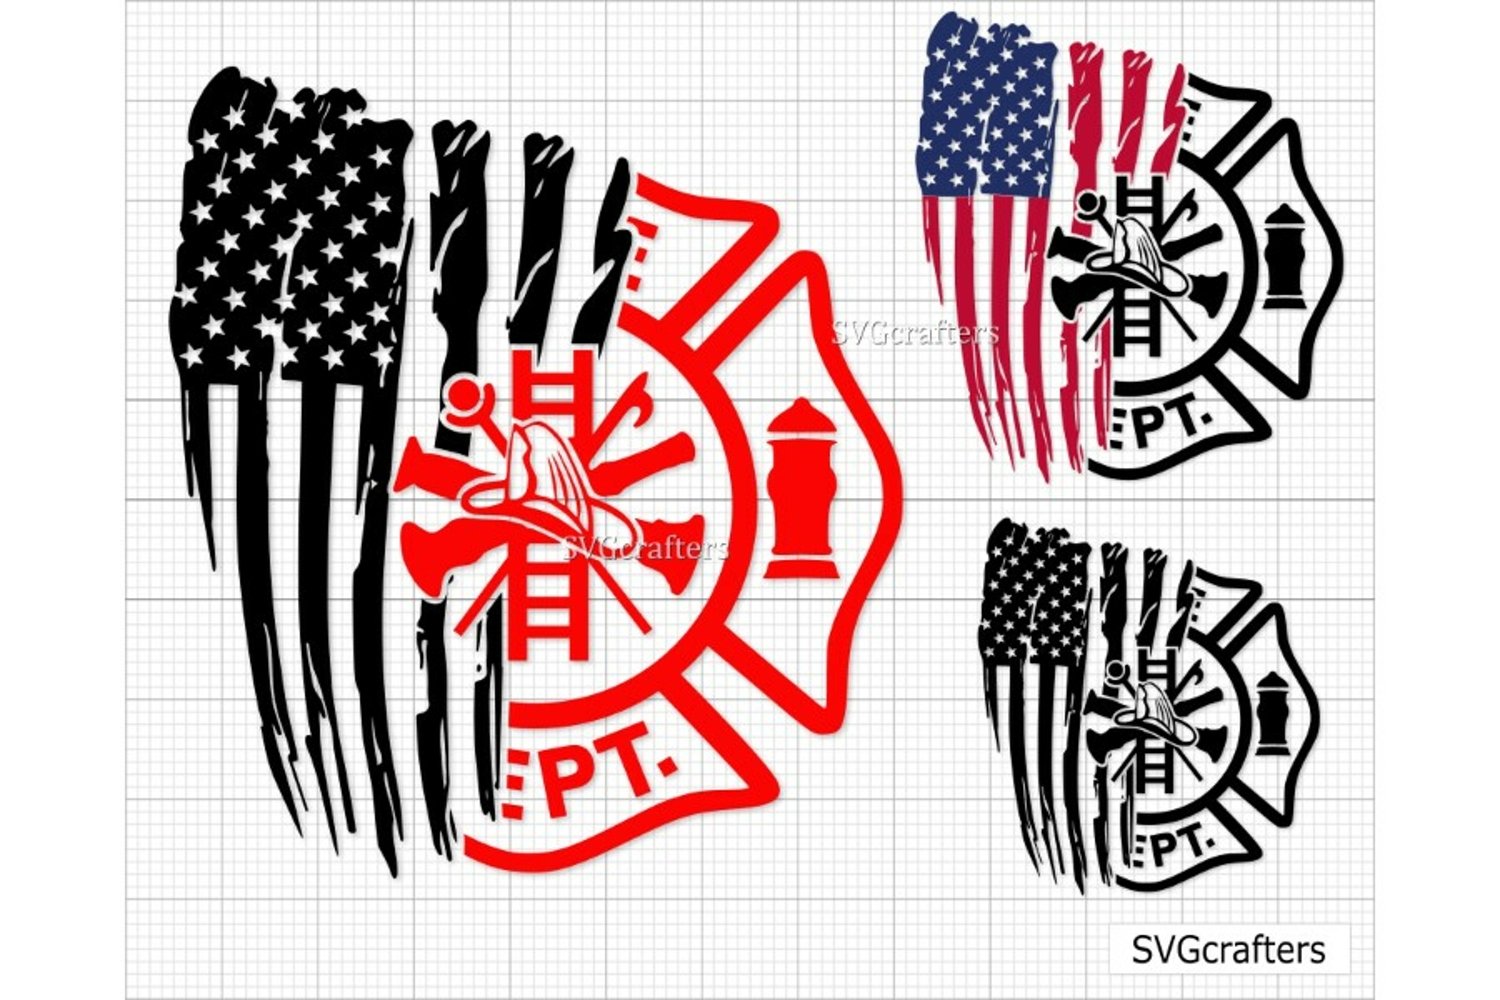 Cover image of Distressed Firefighter Flag SVG.